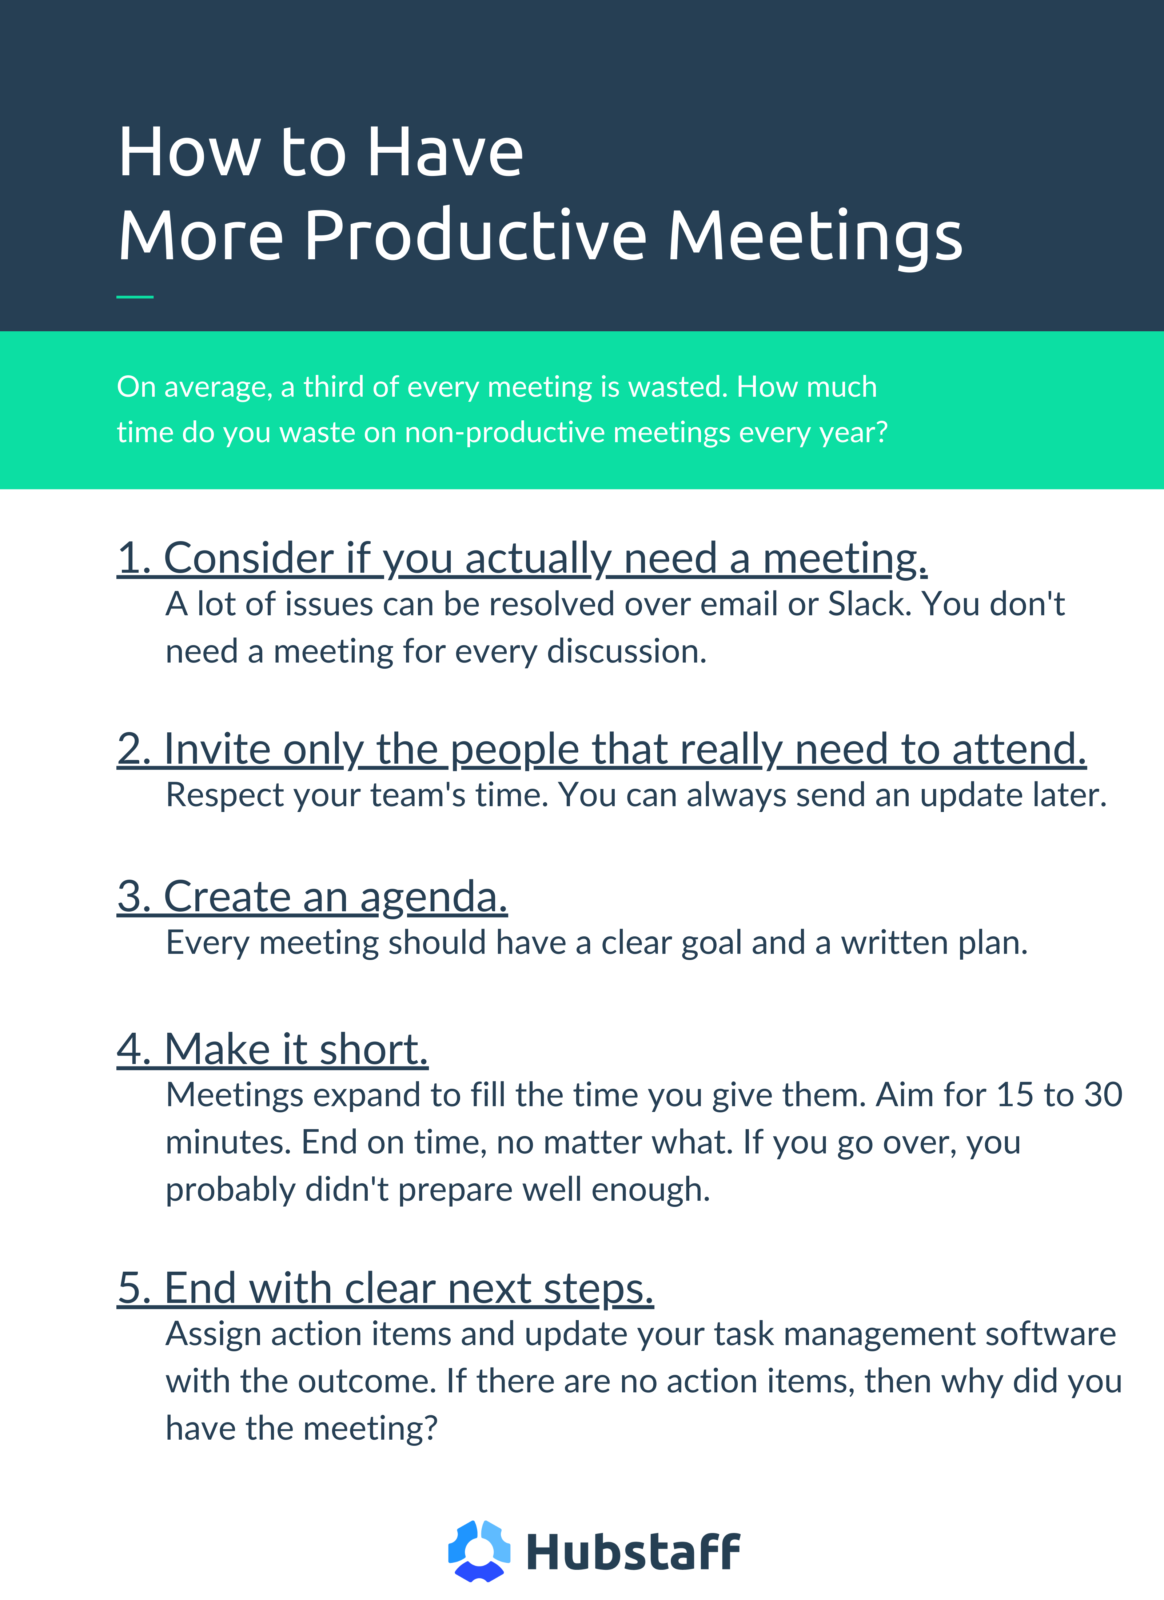 How to have productive meetings